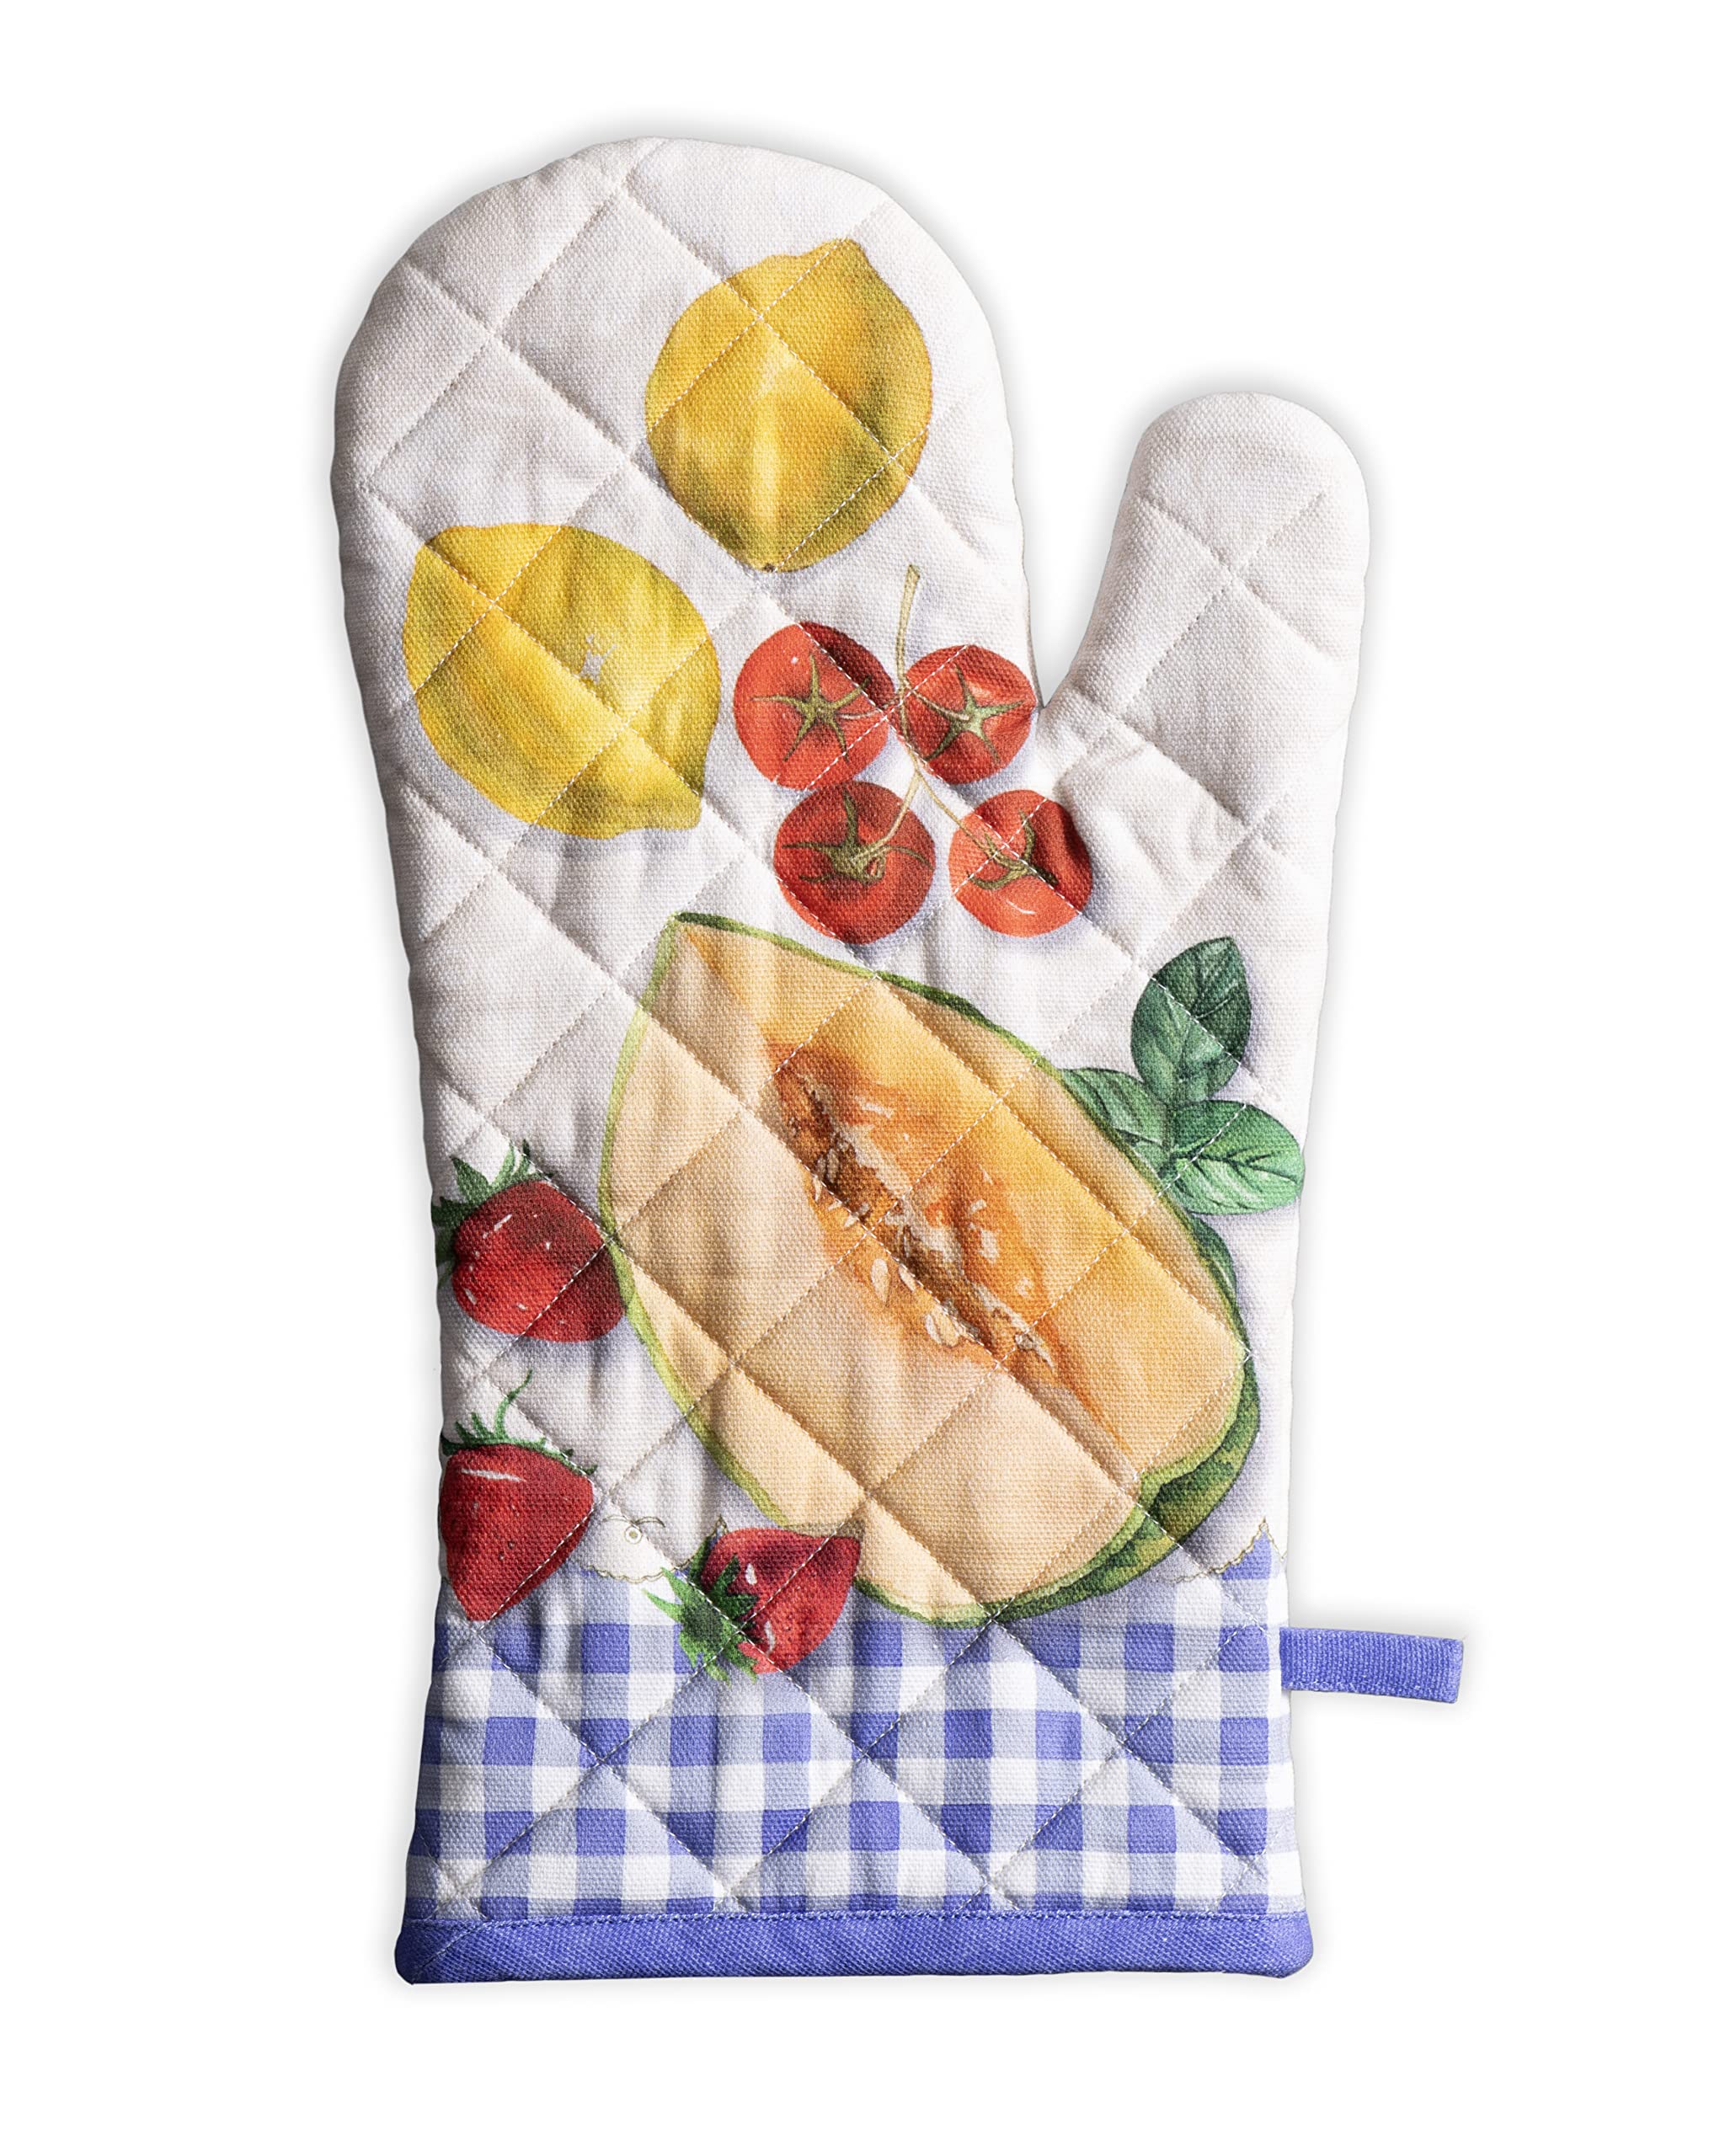 maison d\' hermine Maison d Hermine Oven gloves 100% cotton Easter Oven Mitt Heat Resistant cooking gloves with Loop for Baking grilling Microwave,